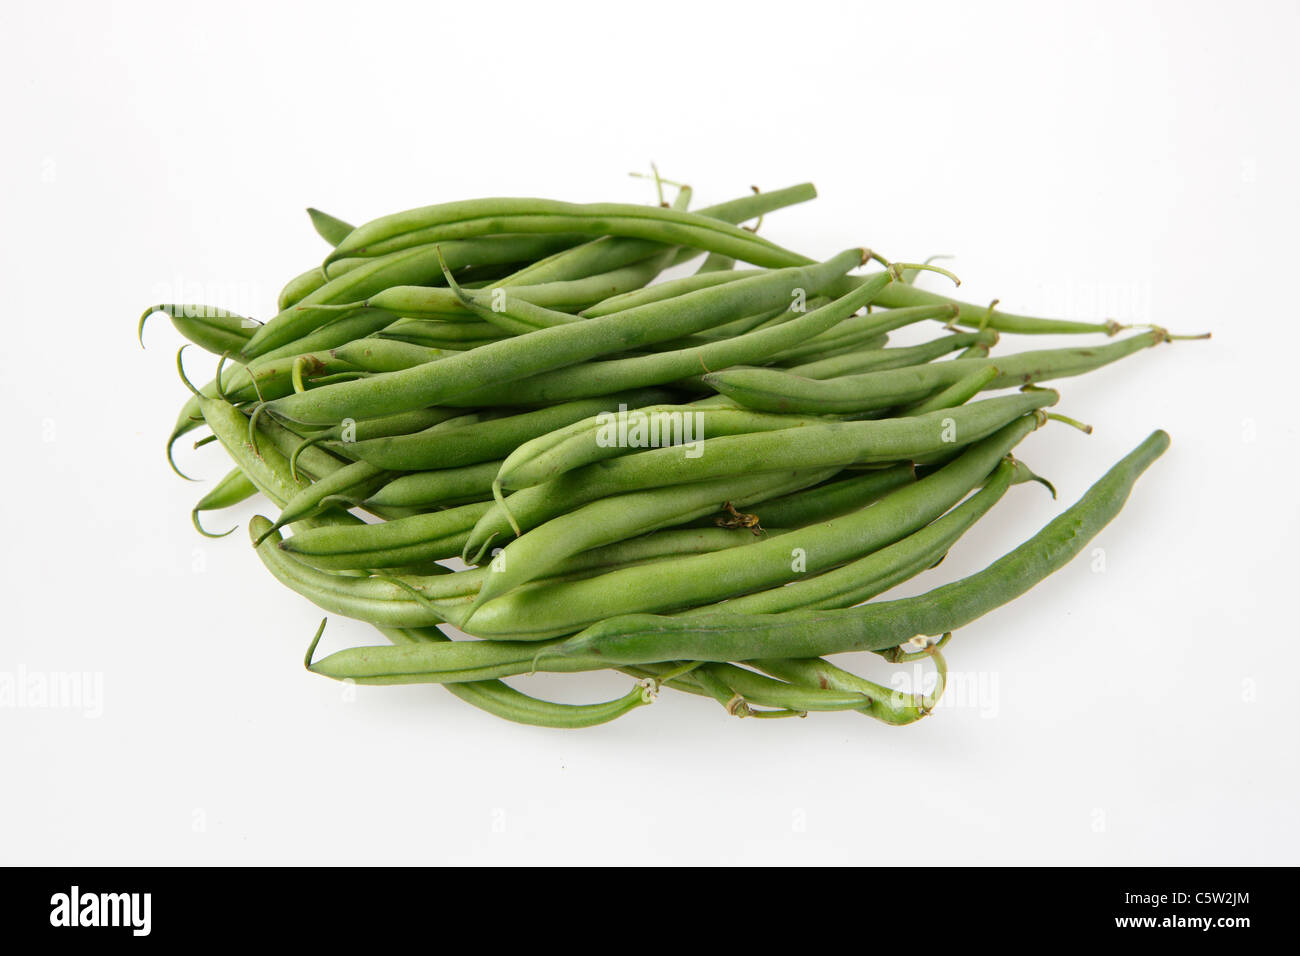 Green beans, close-up Stock Photo